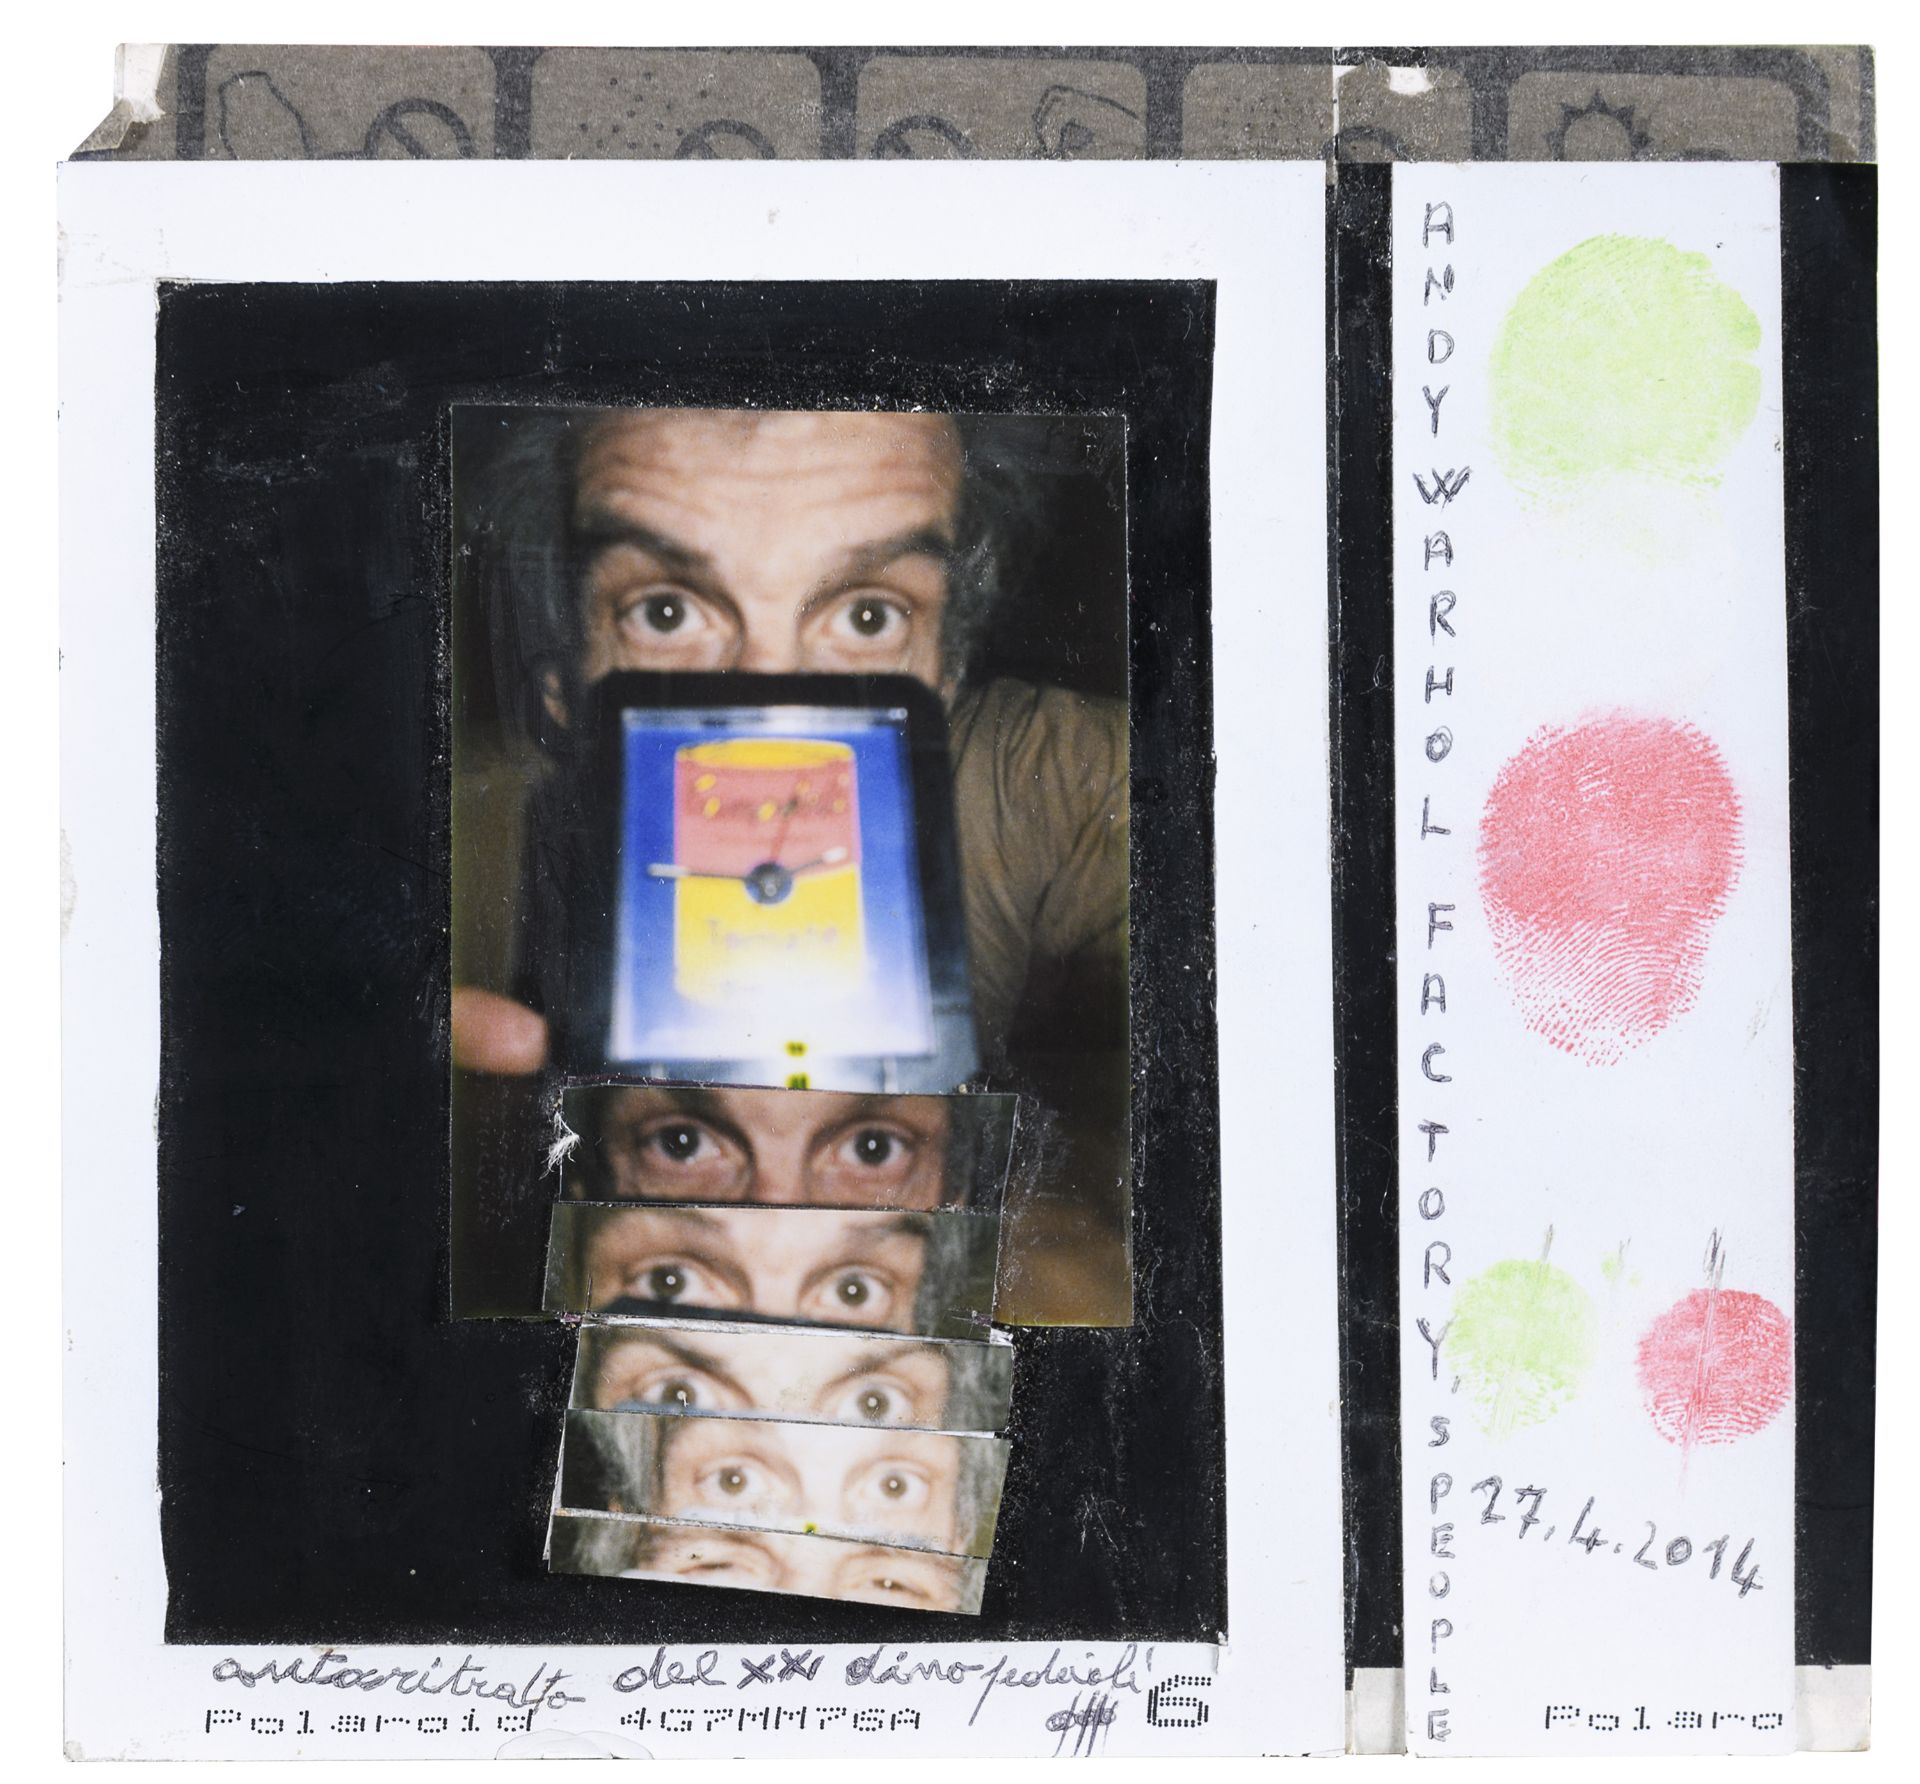 POLAROID PICTURES AND VOLUME BY ANDY WARHOL AND DINO PEDRIALI - Image 2 of 2